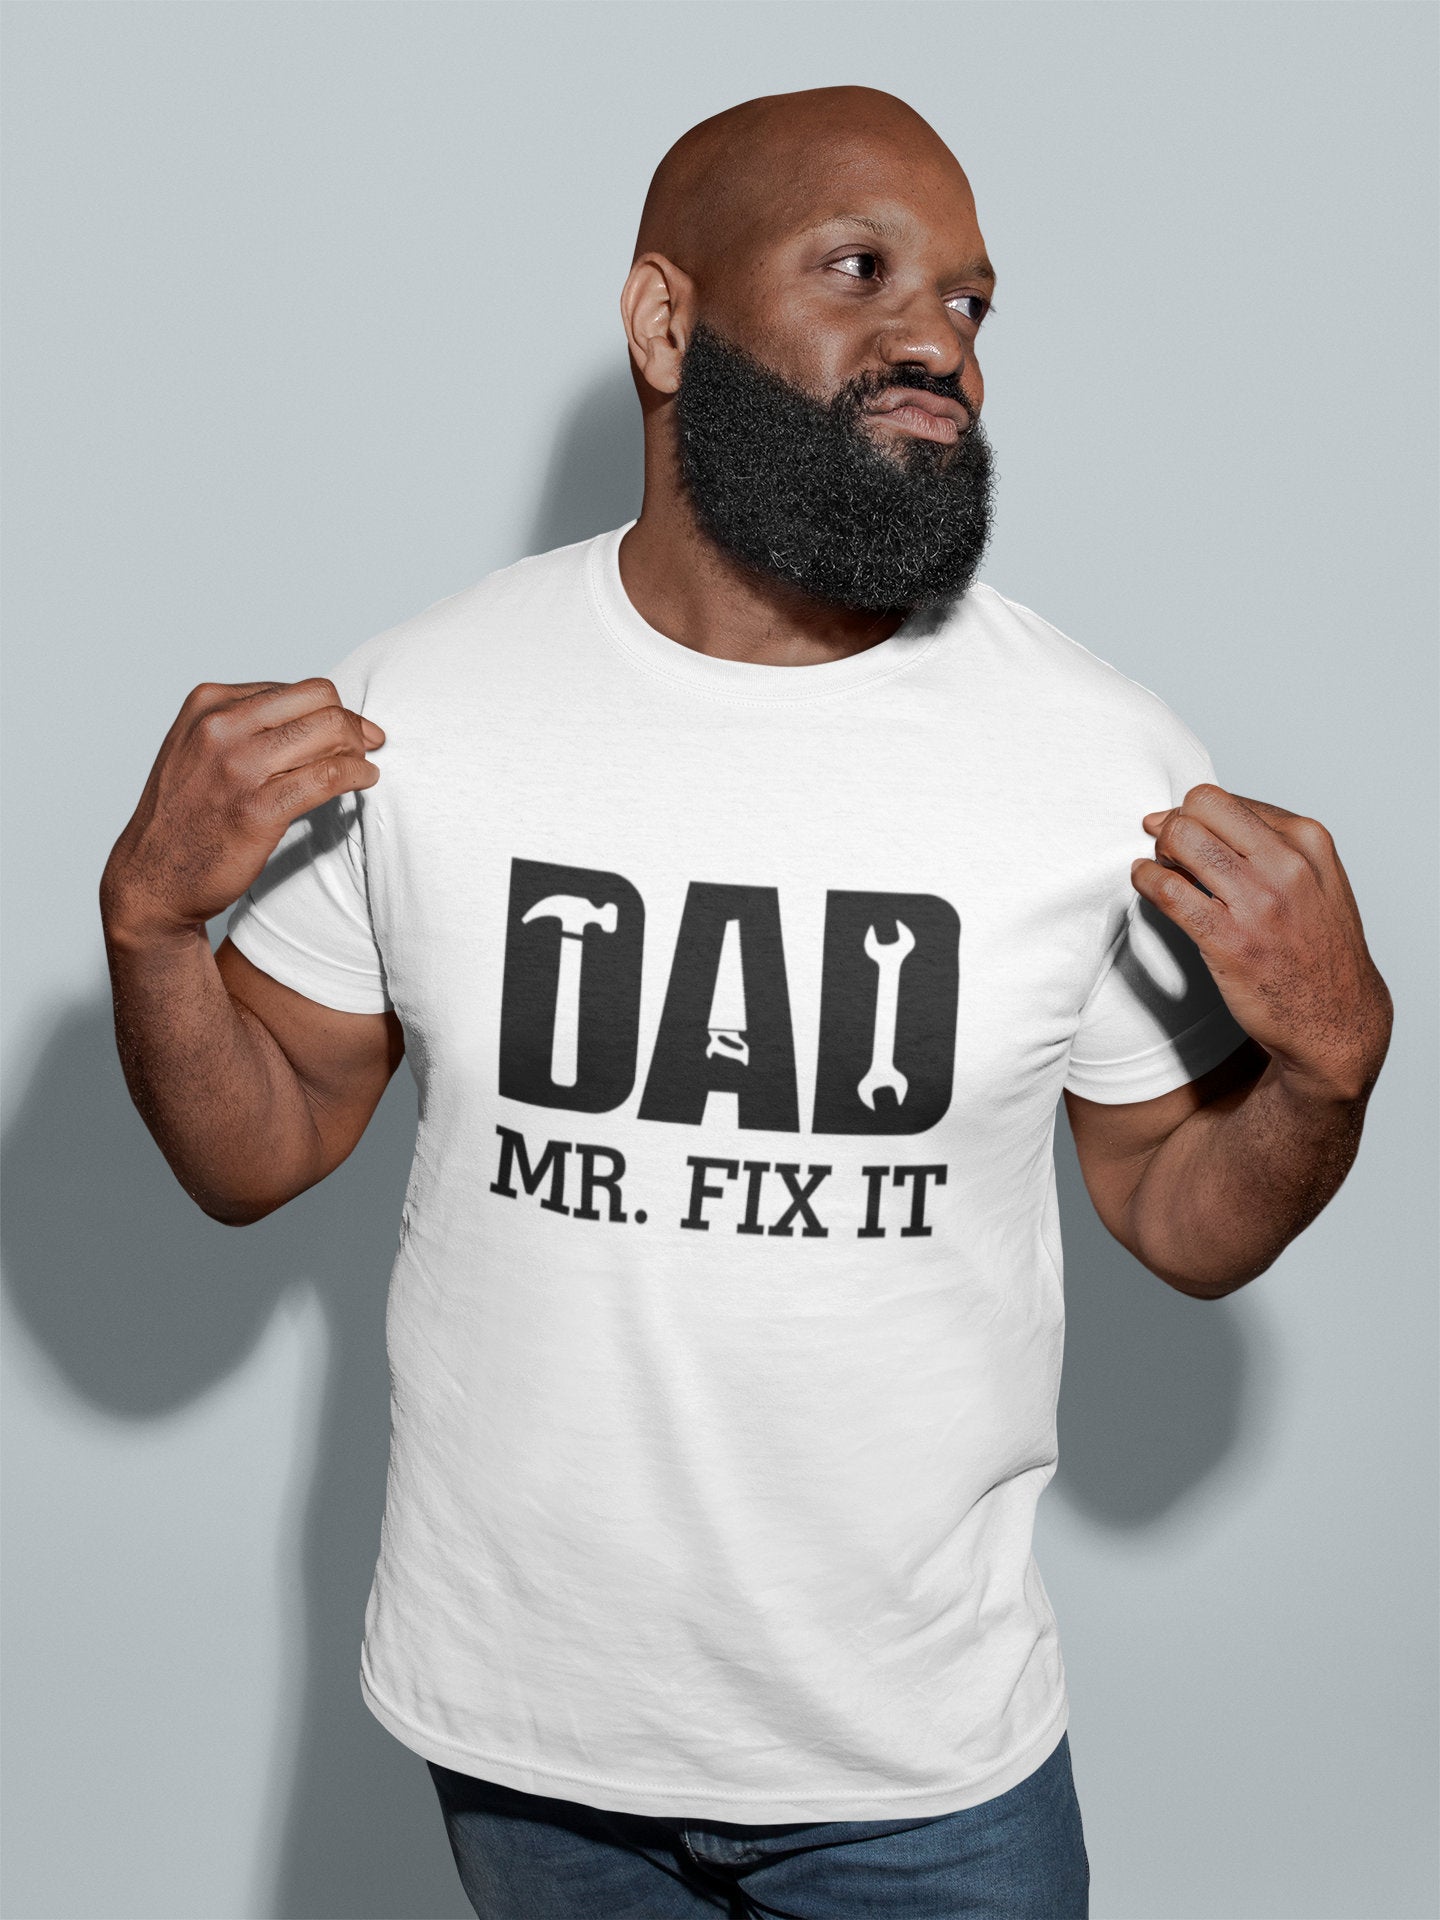 Mr. Fix It Father's Day shirt